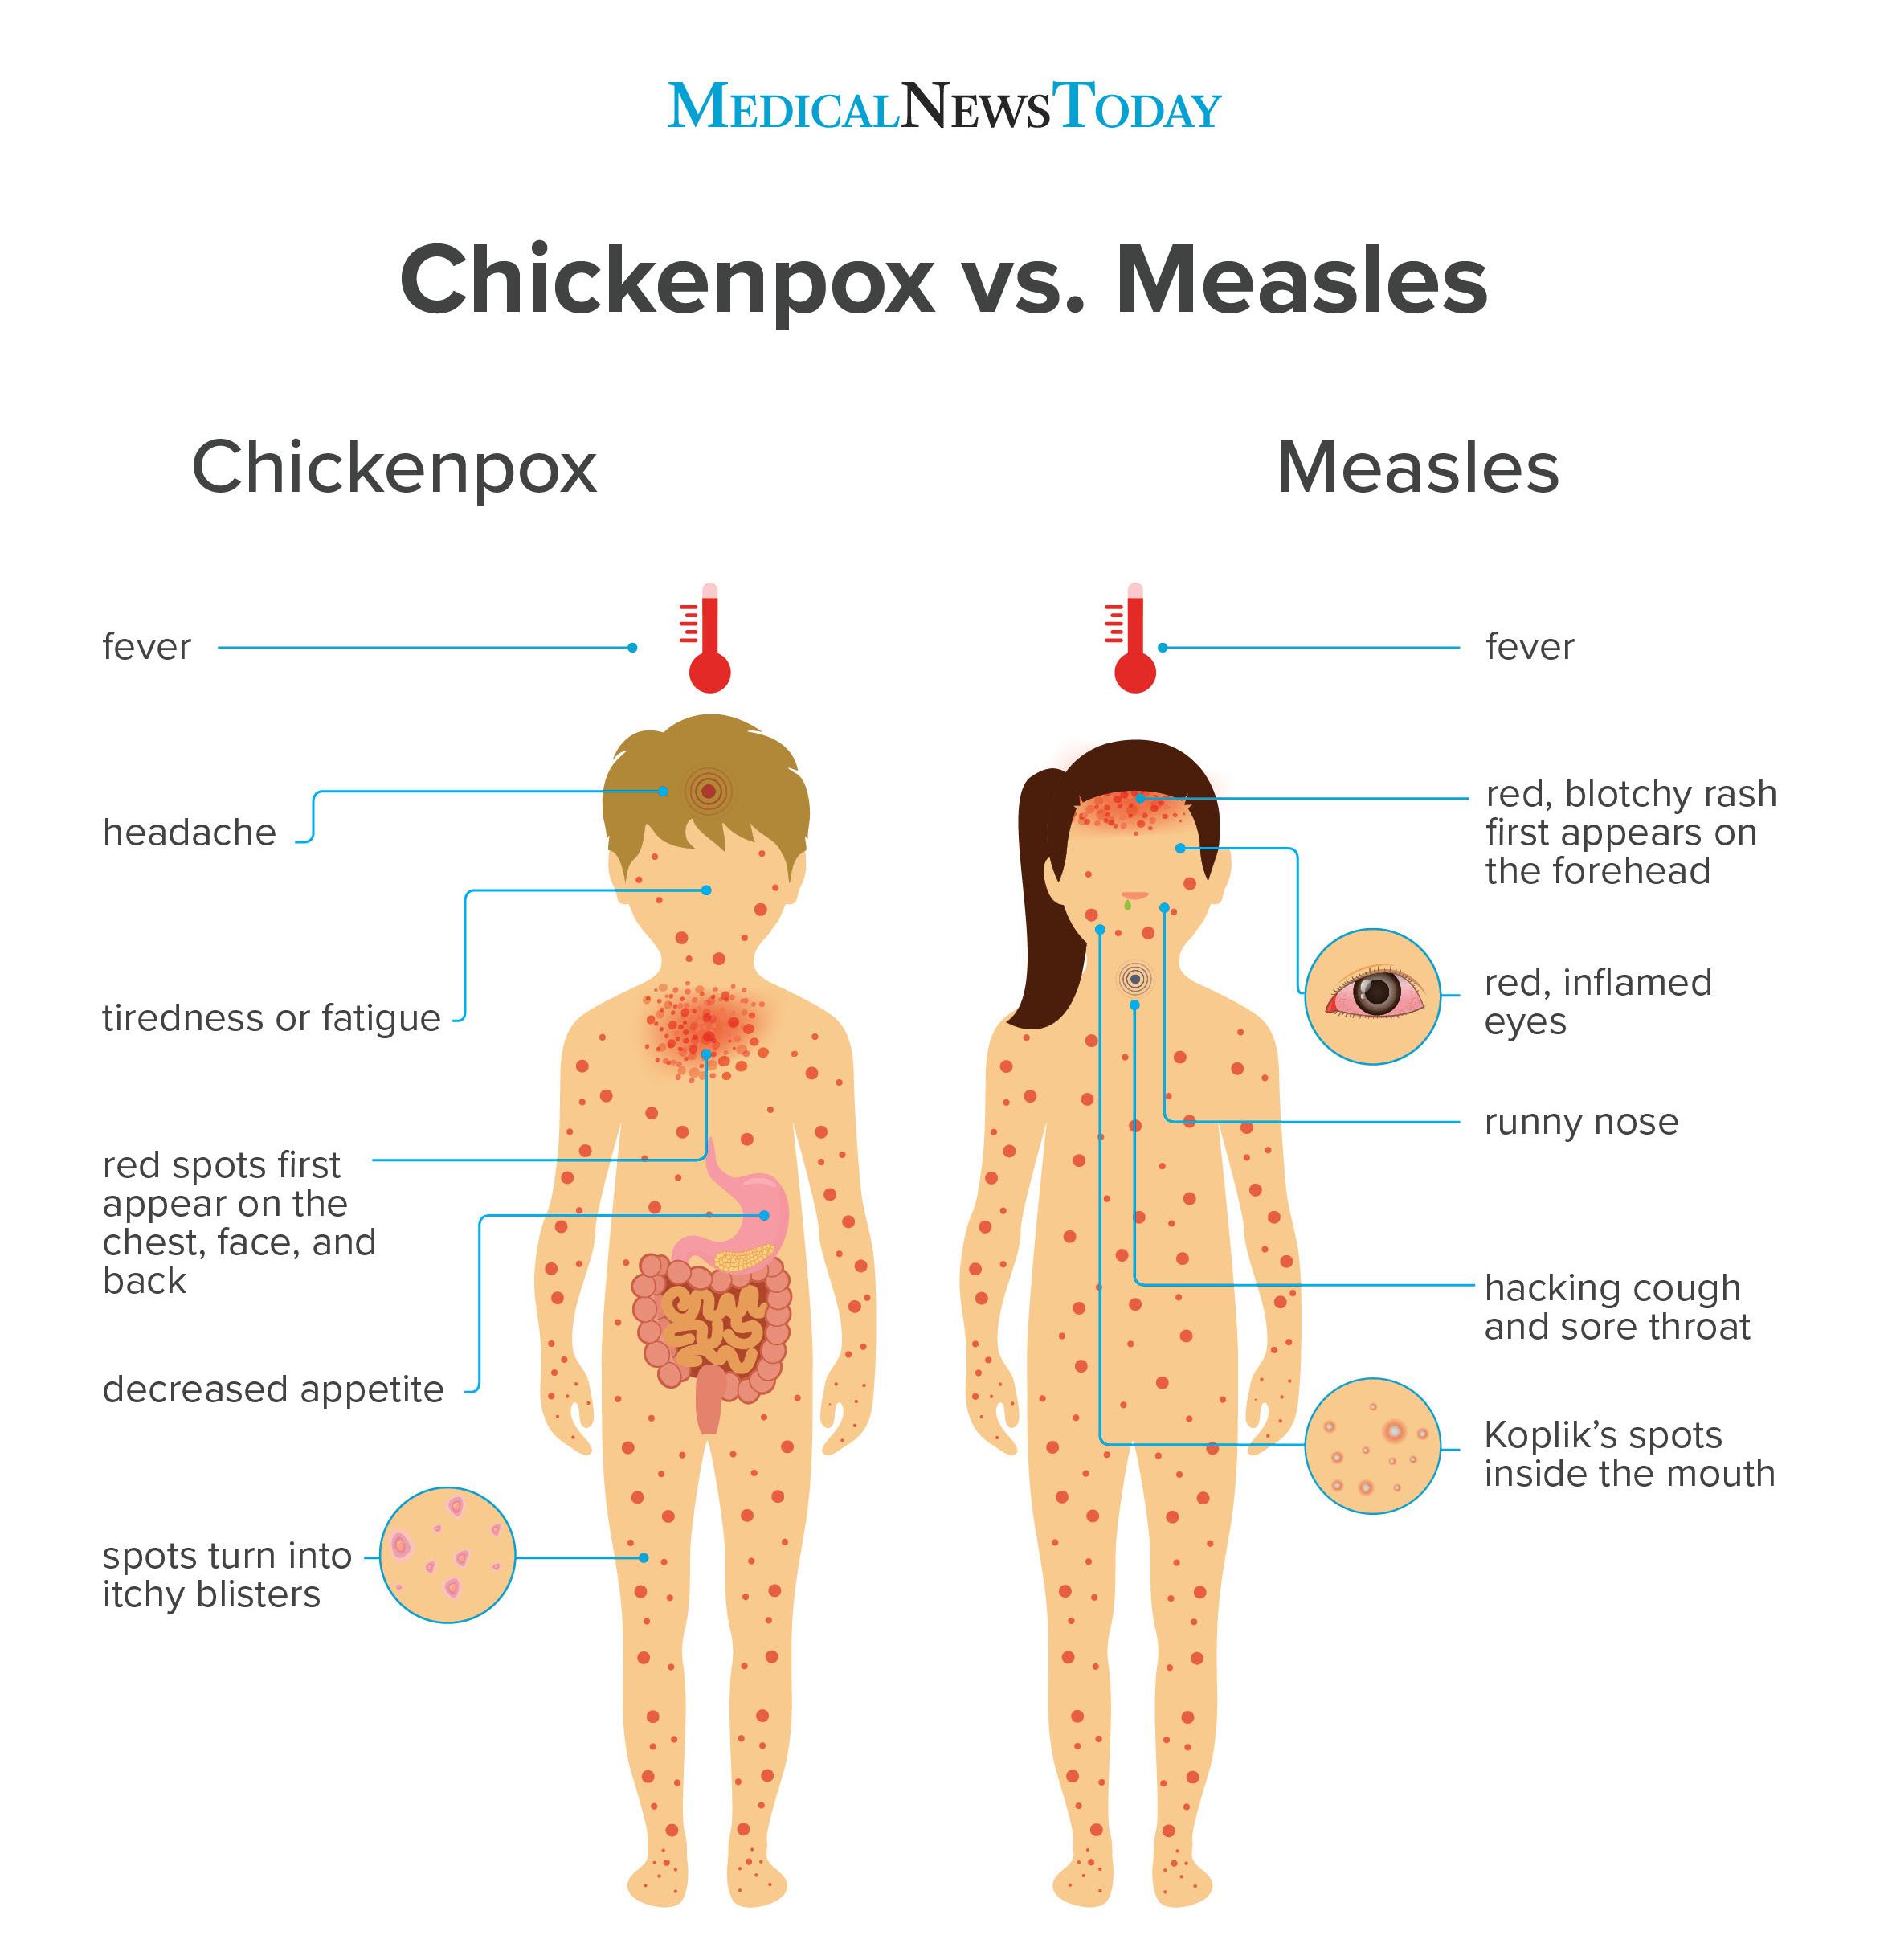 chickenpox vs measles infographic br image credit stephen kelly 2018 br